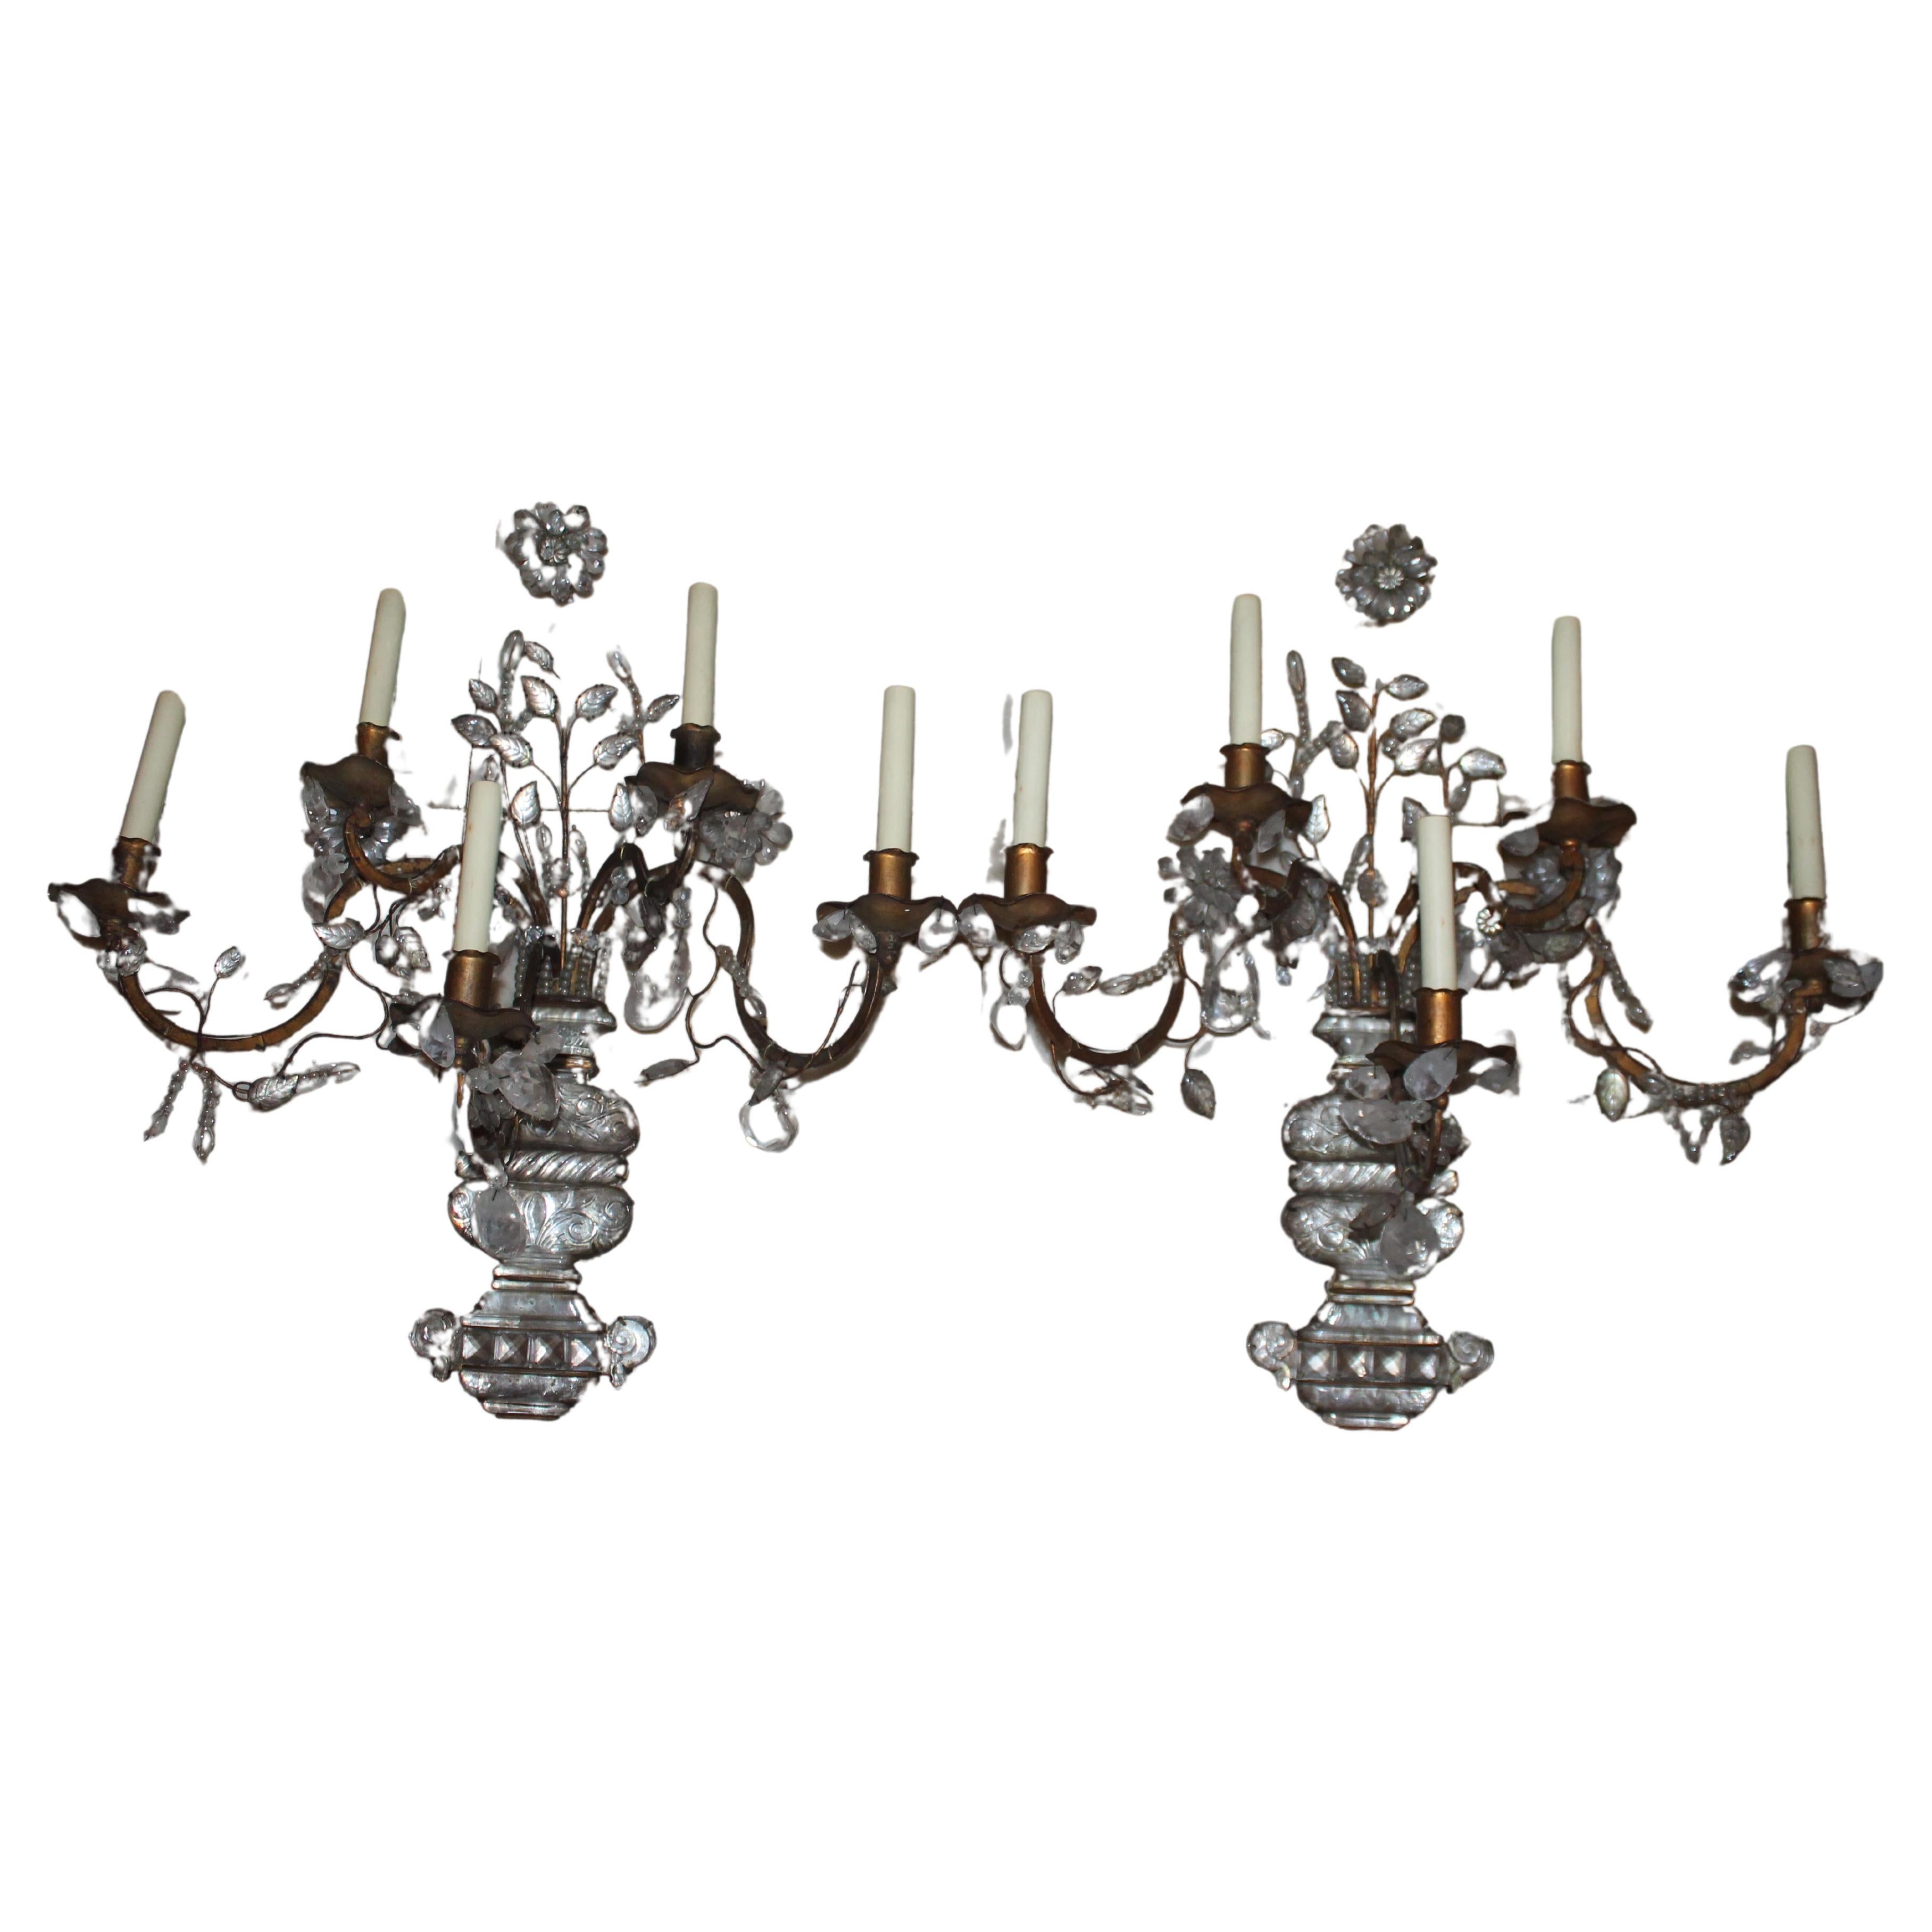 Pair XL 1940's French Regency Rock Crystal Sconces by Maison Bagues For Sale